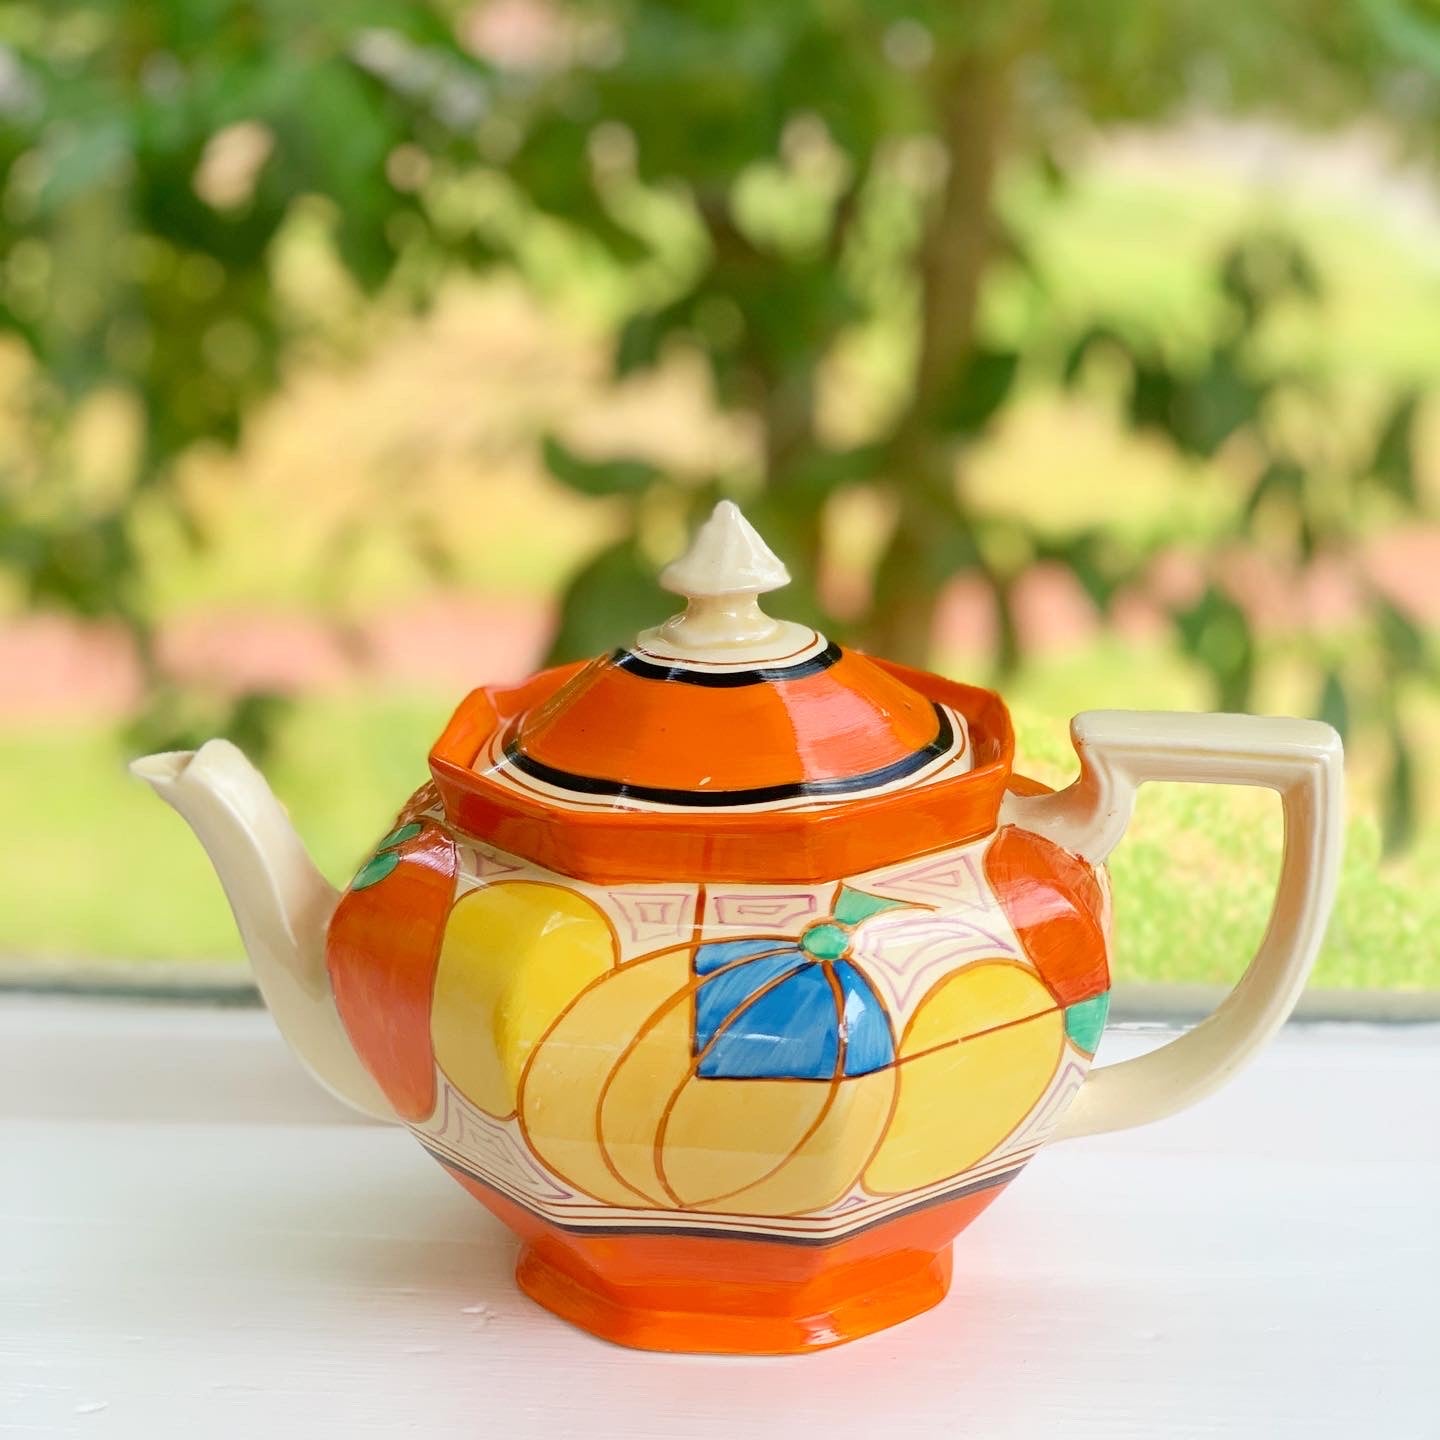 Picasso Melon Athens-Shaped Teapot by Clarice Cliff